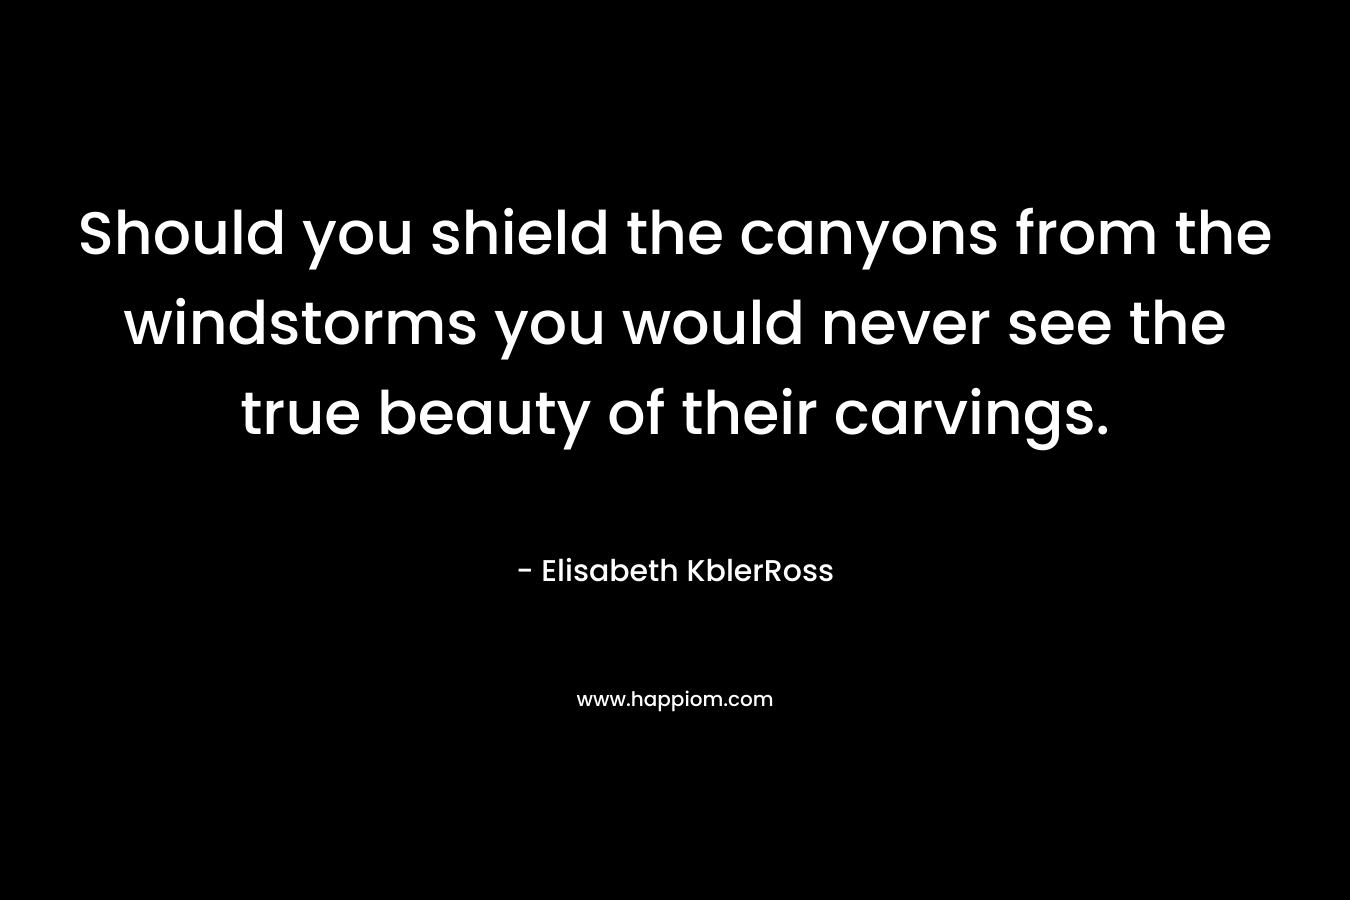 Should you shield the canyons from the windstorms you would never see the true beauty of their carvings. – Elisabeth KblerRoss